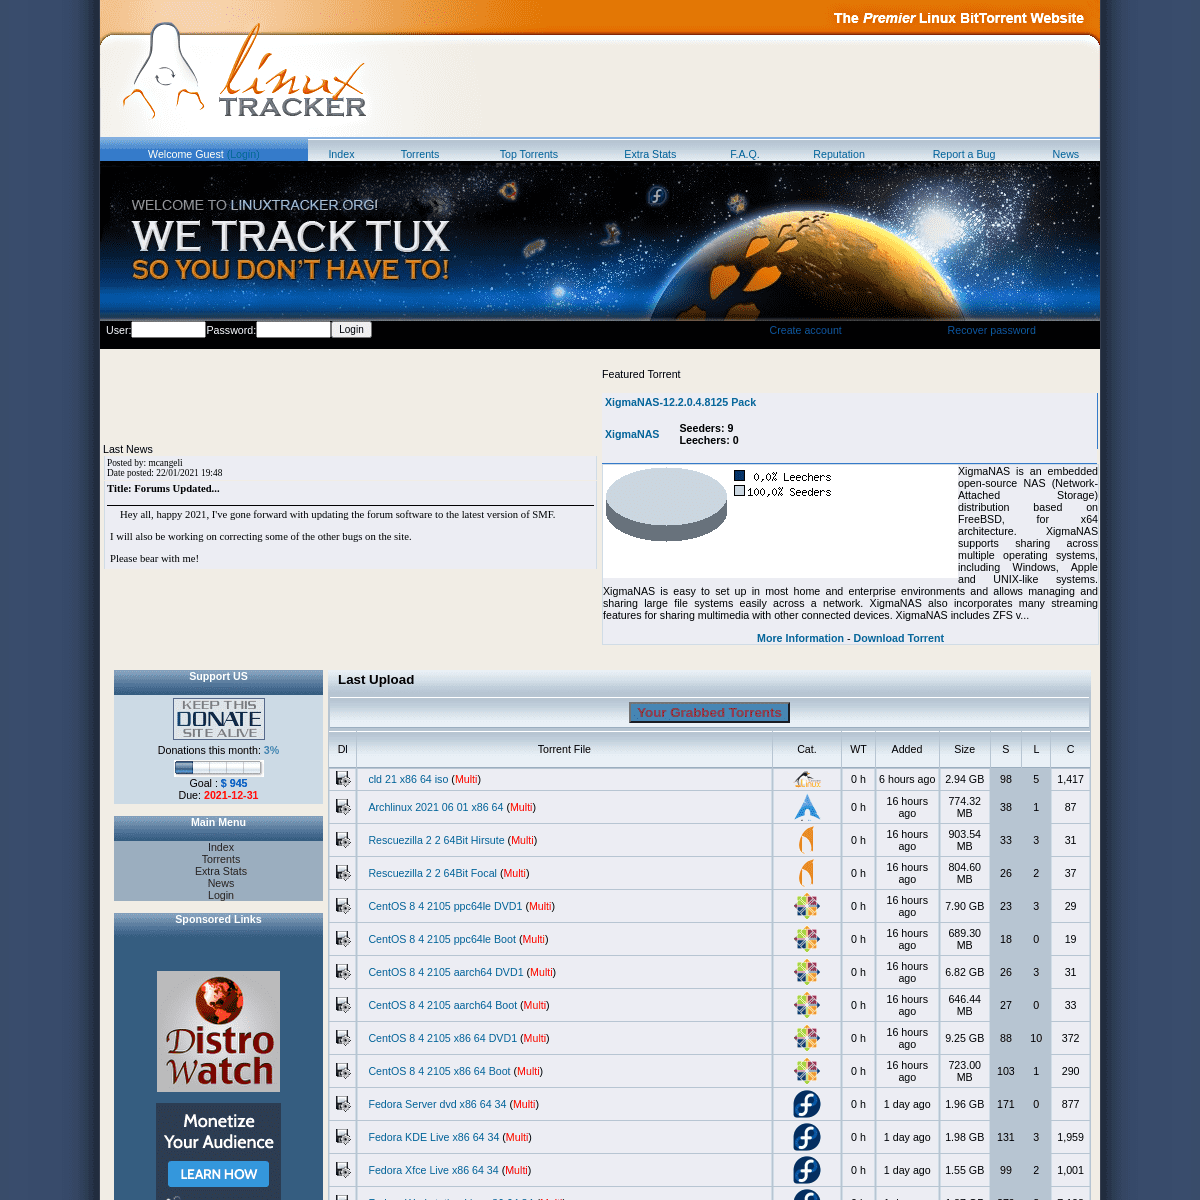 A complete backup of https://linuxtracker.org